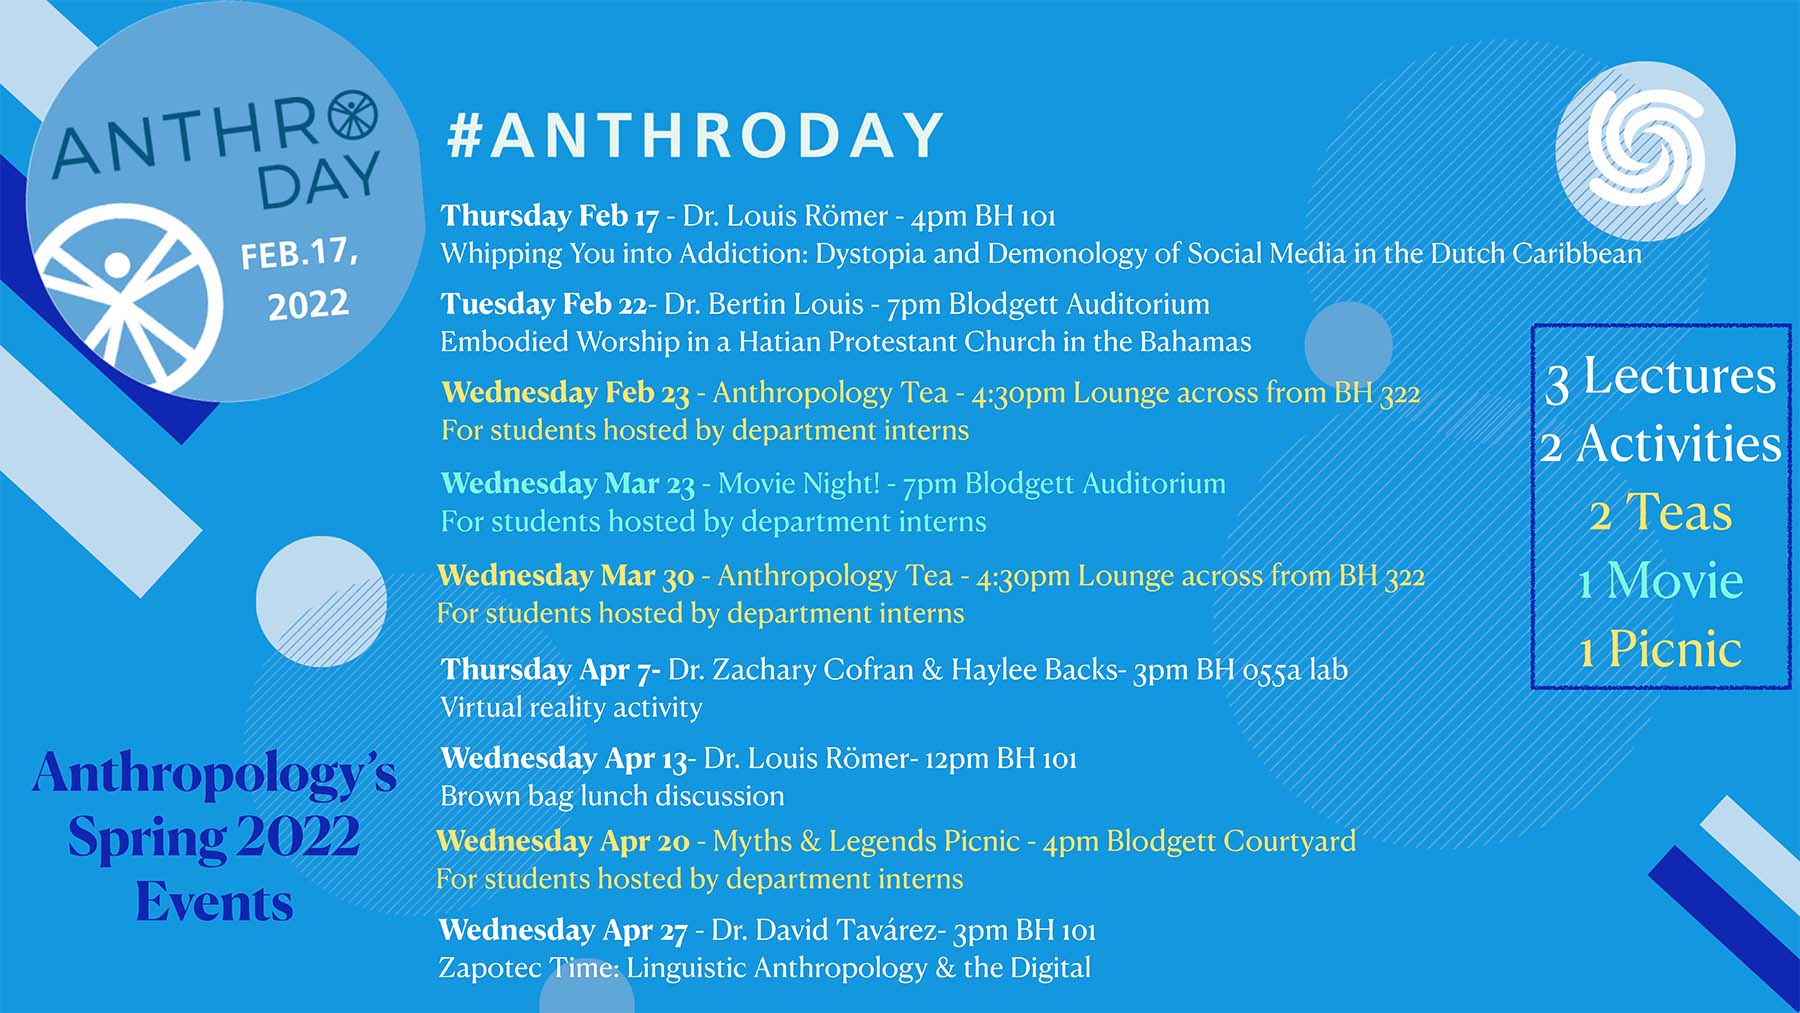 Anthropology’s Spring 2022 Events